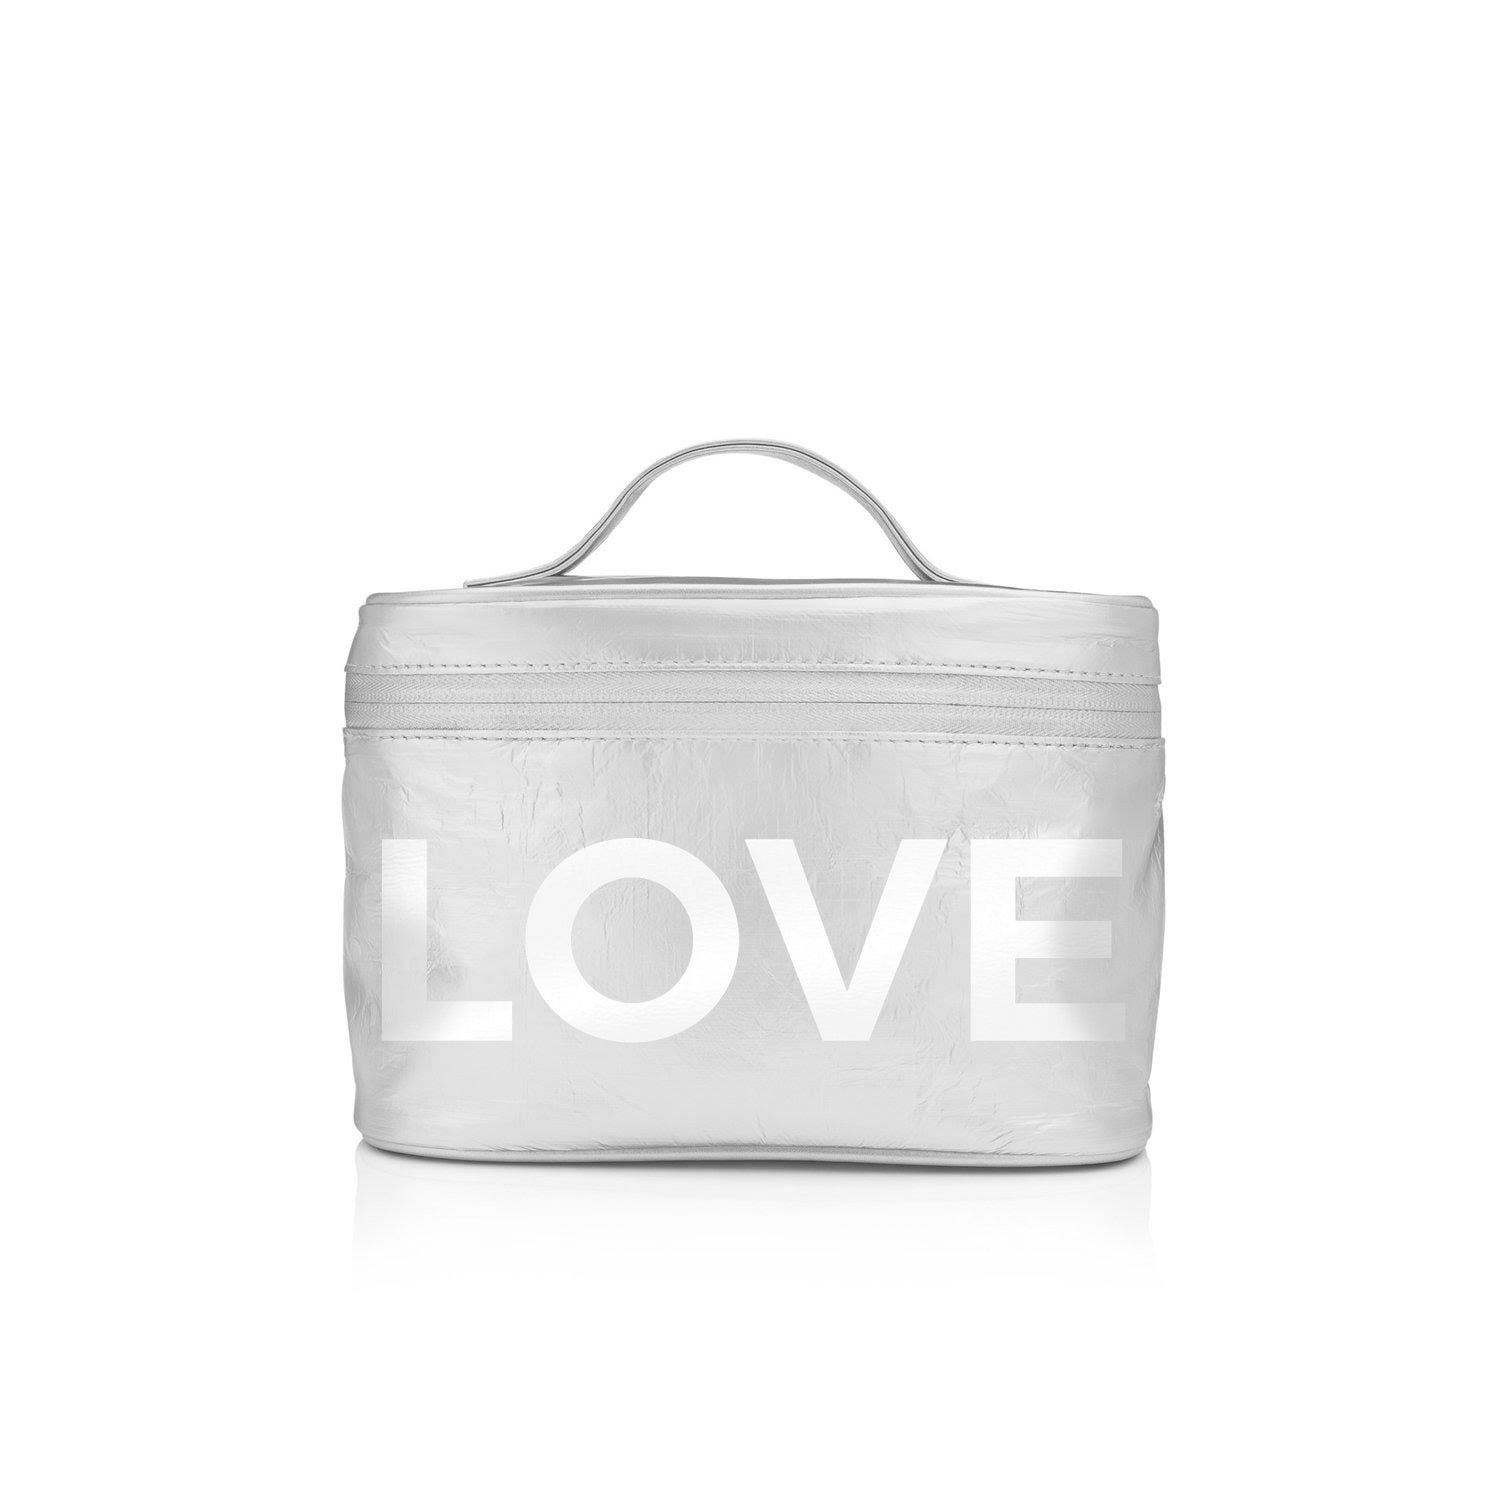 Cosmetic Case or Lunch Box in Silver with White "LOVE"